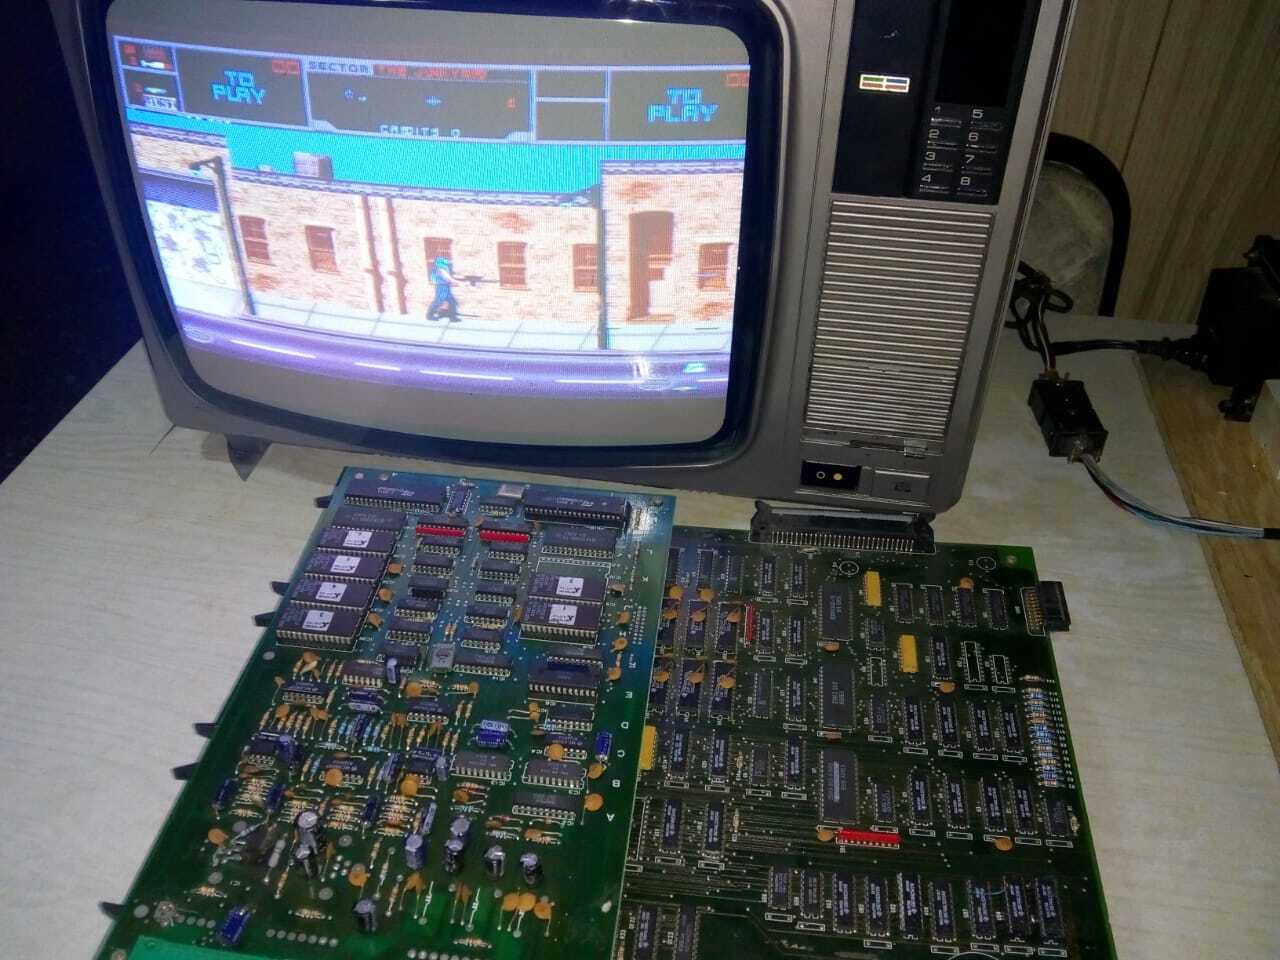 NARC Williams Arcade PCB Copy of the ORIGINAL Video Game boot leg working 